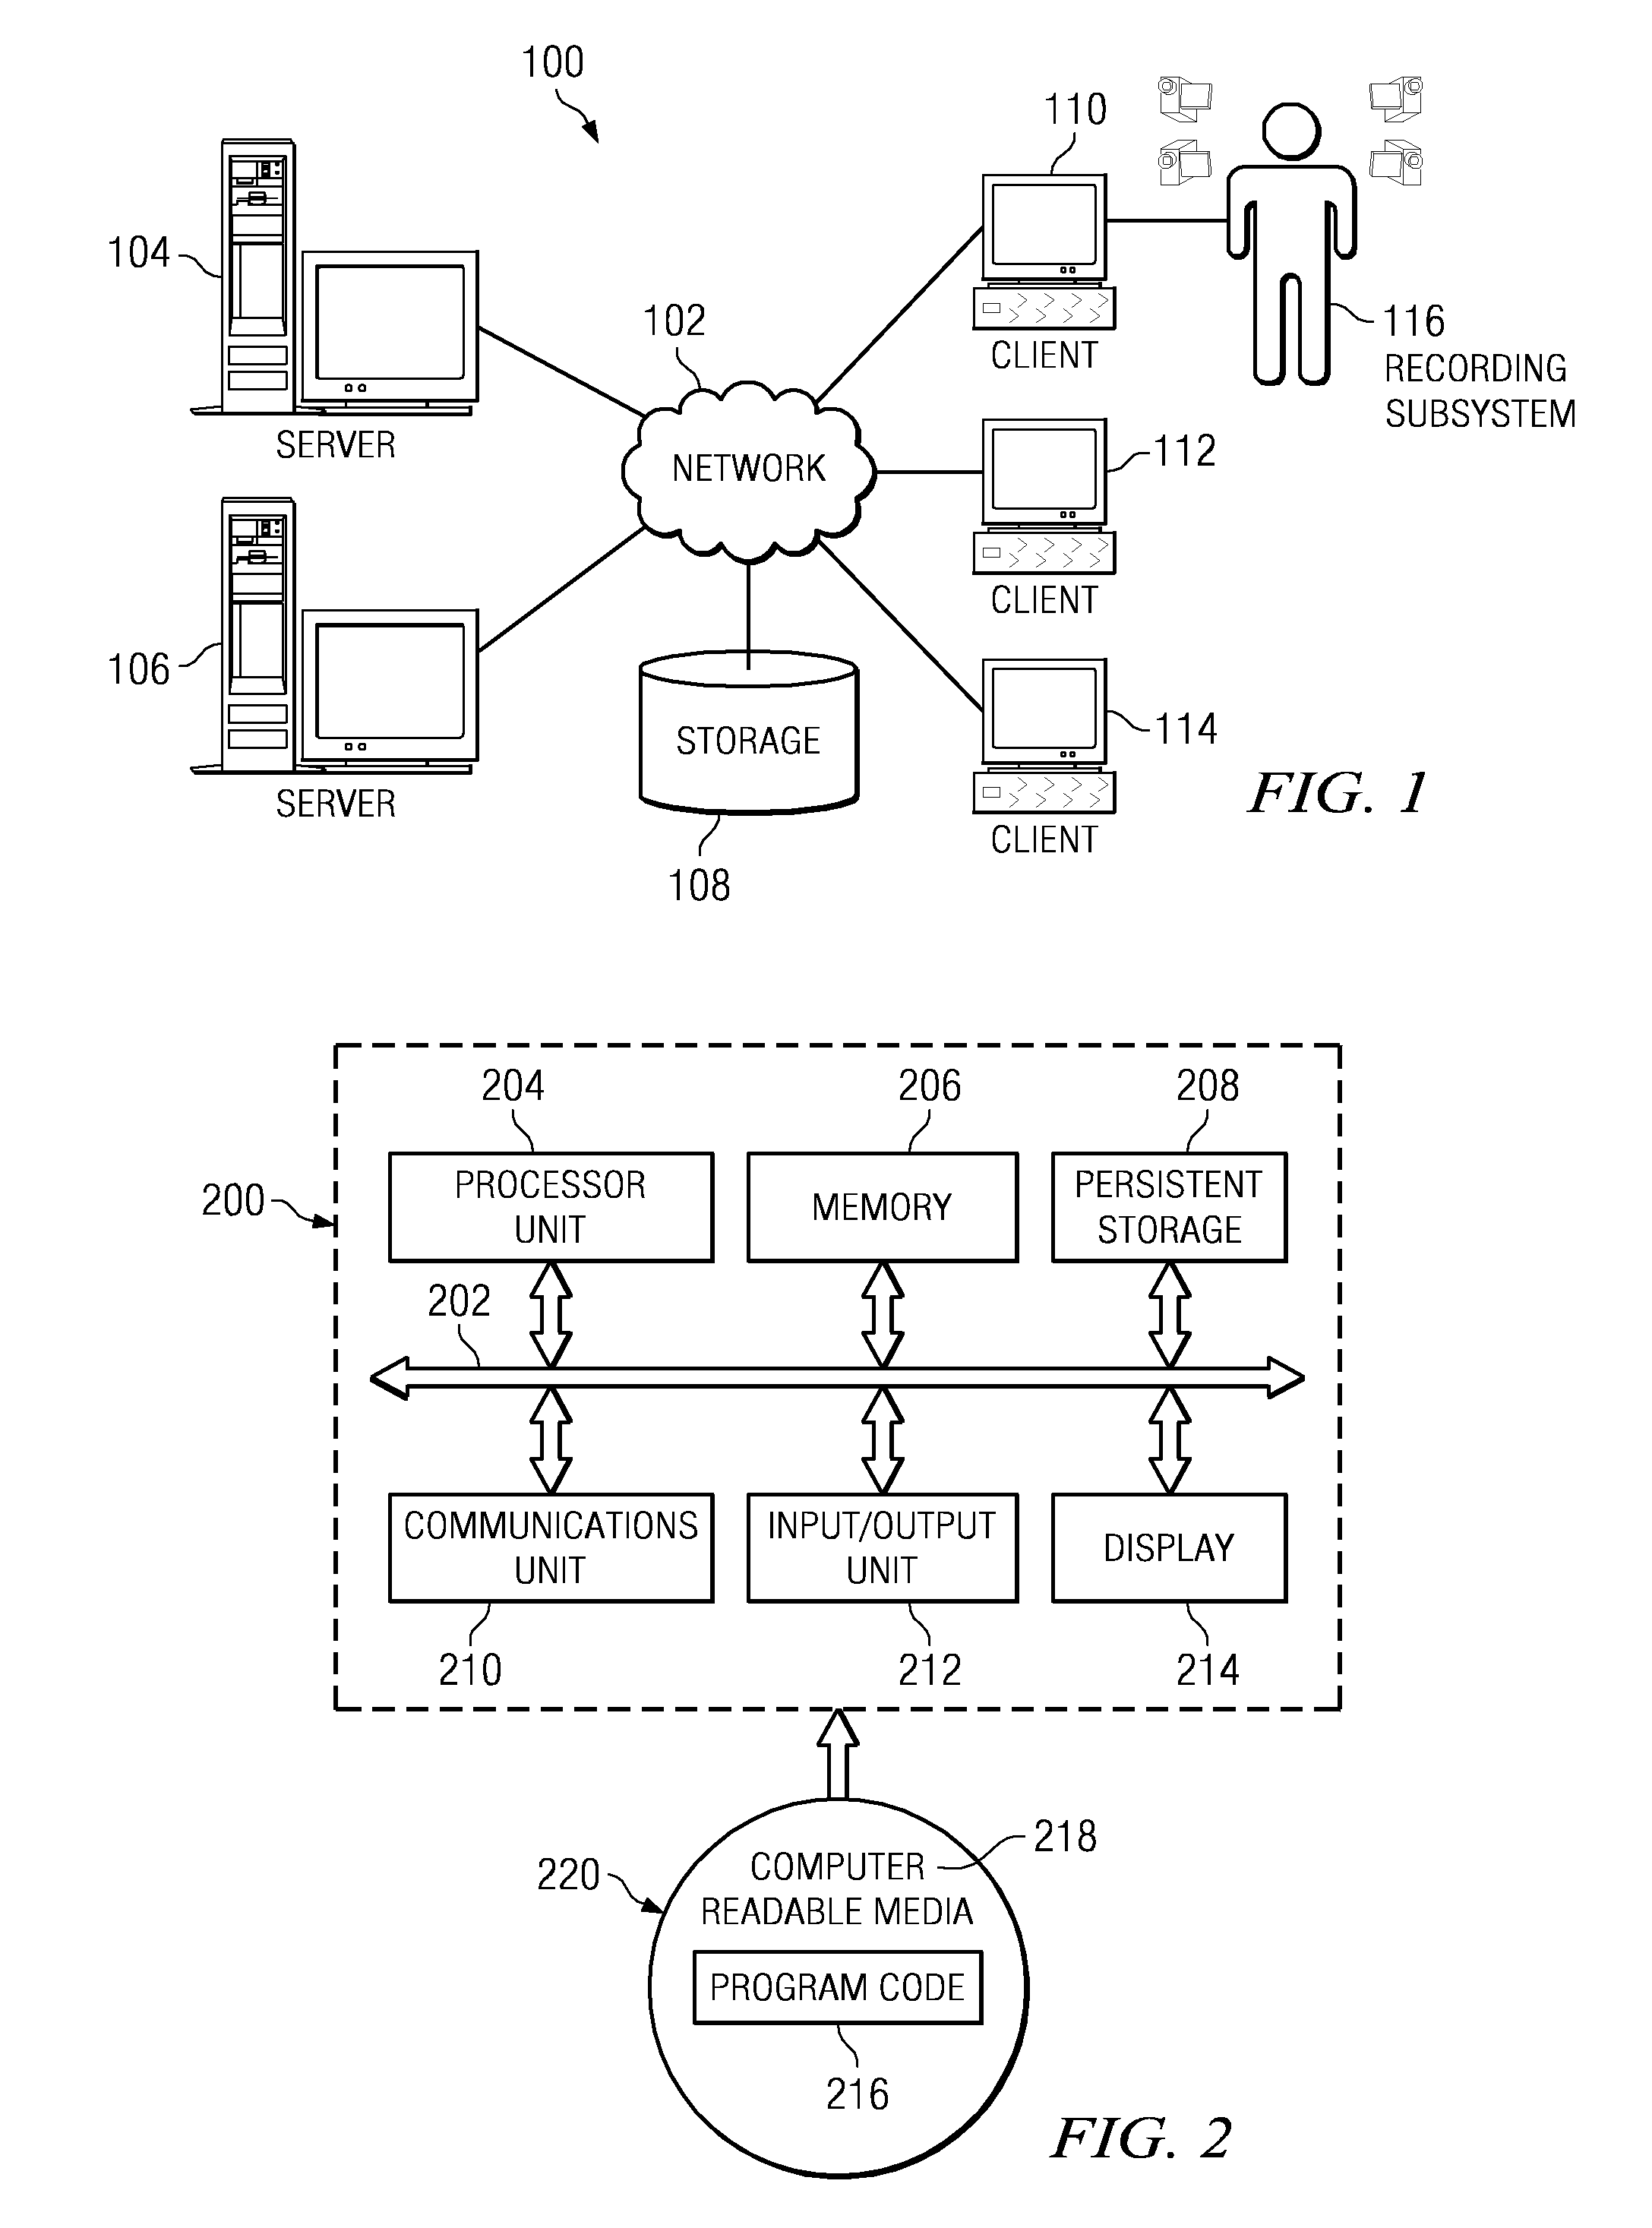 Method and apparatus for digital life recording and playback